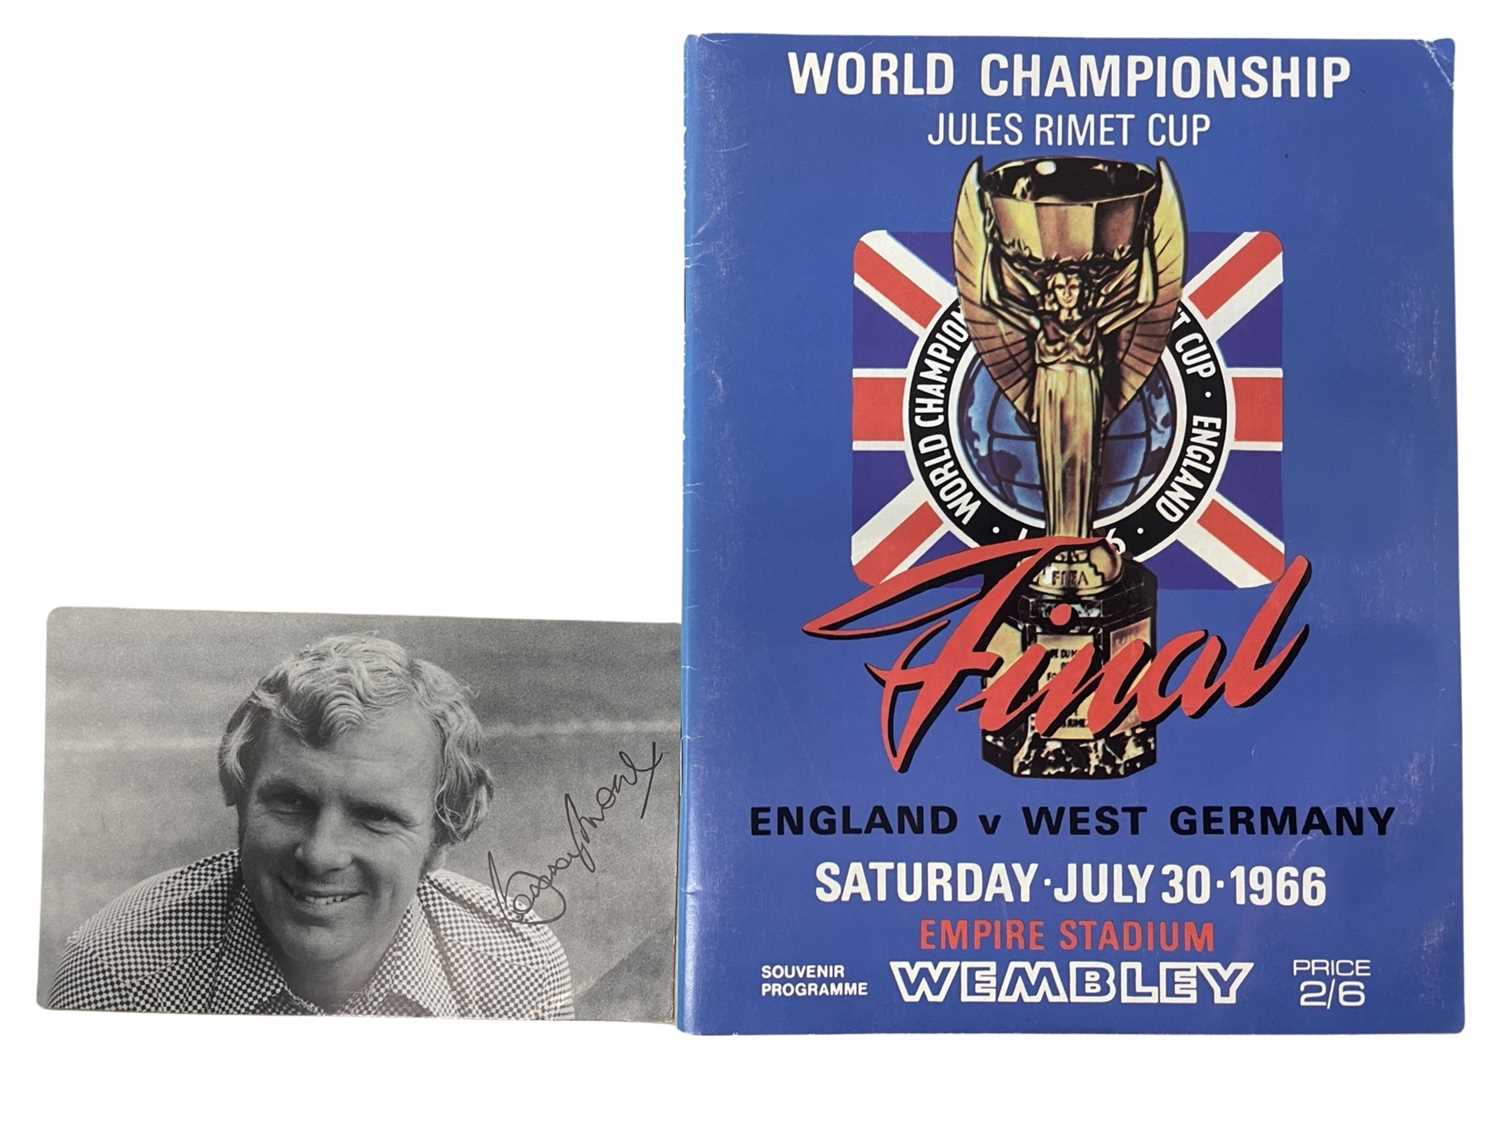 A 1966 England v West Germany football programme (reprint), together with a photograph of Sir